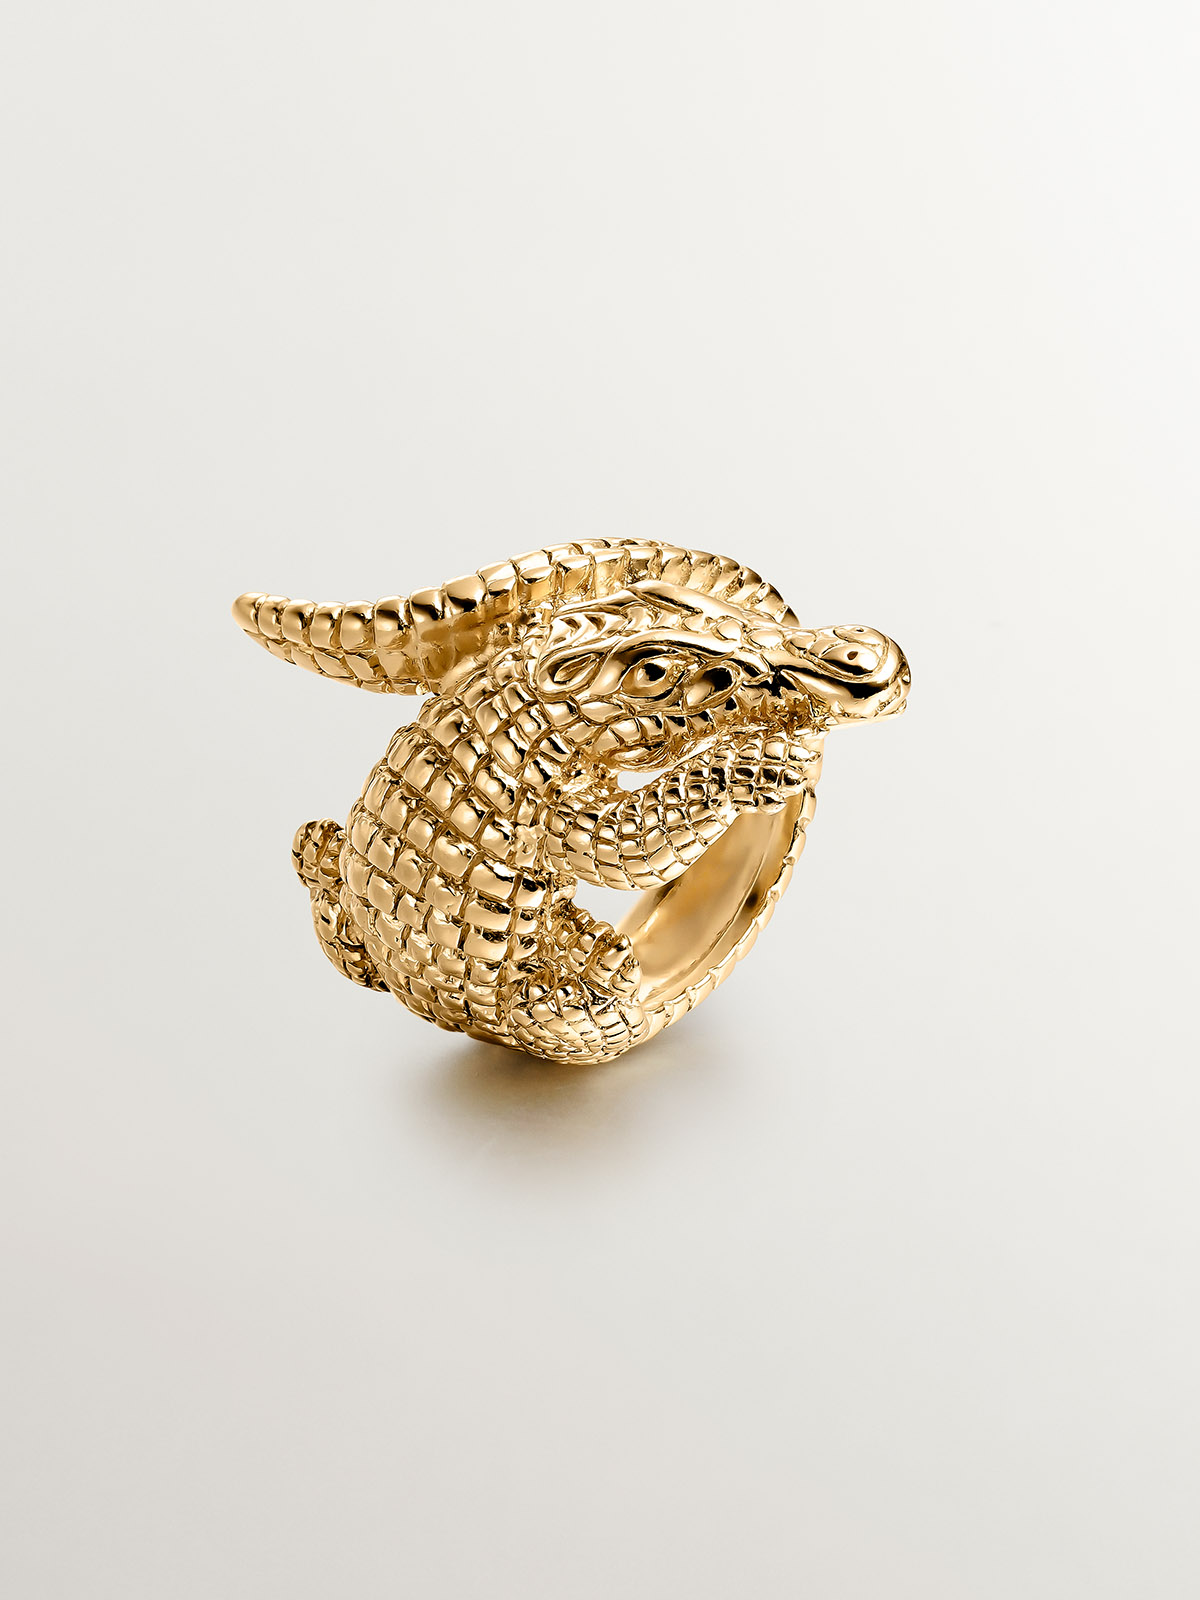 925 Silver wide ring, dipped in 18K yellow gold, in the shape of a crocodile.